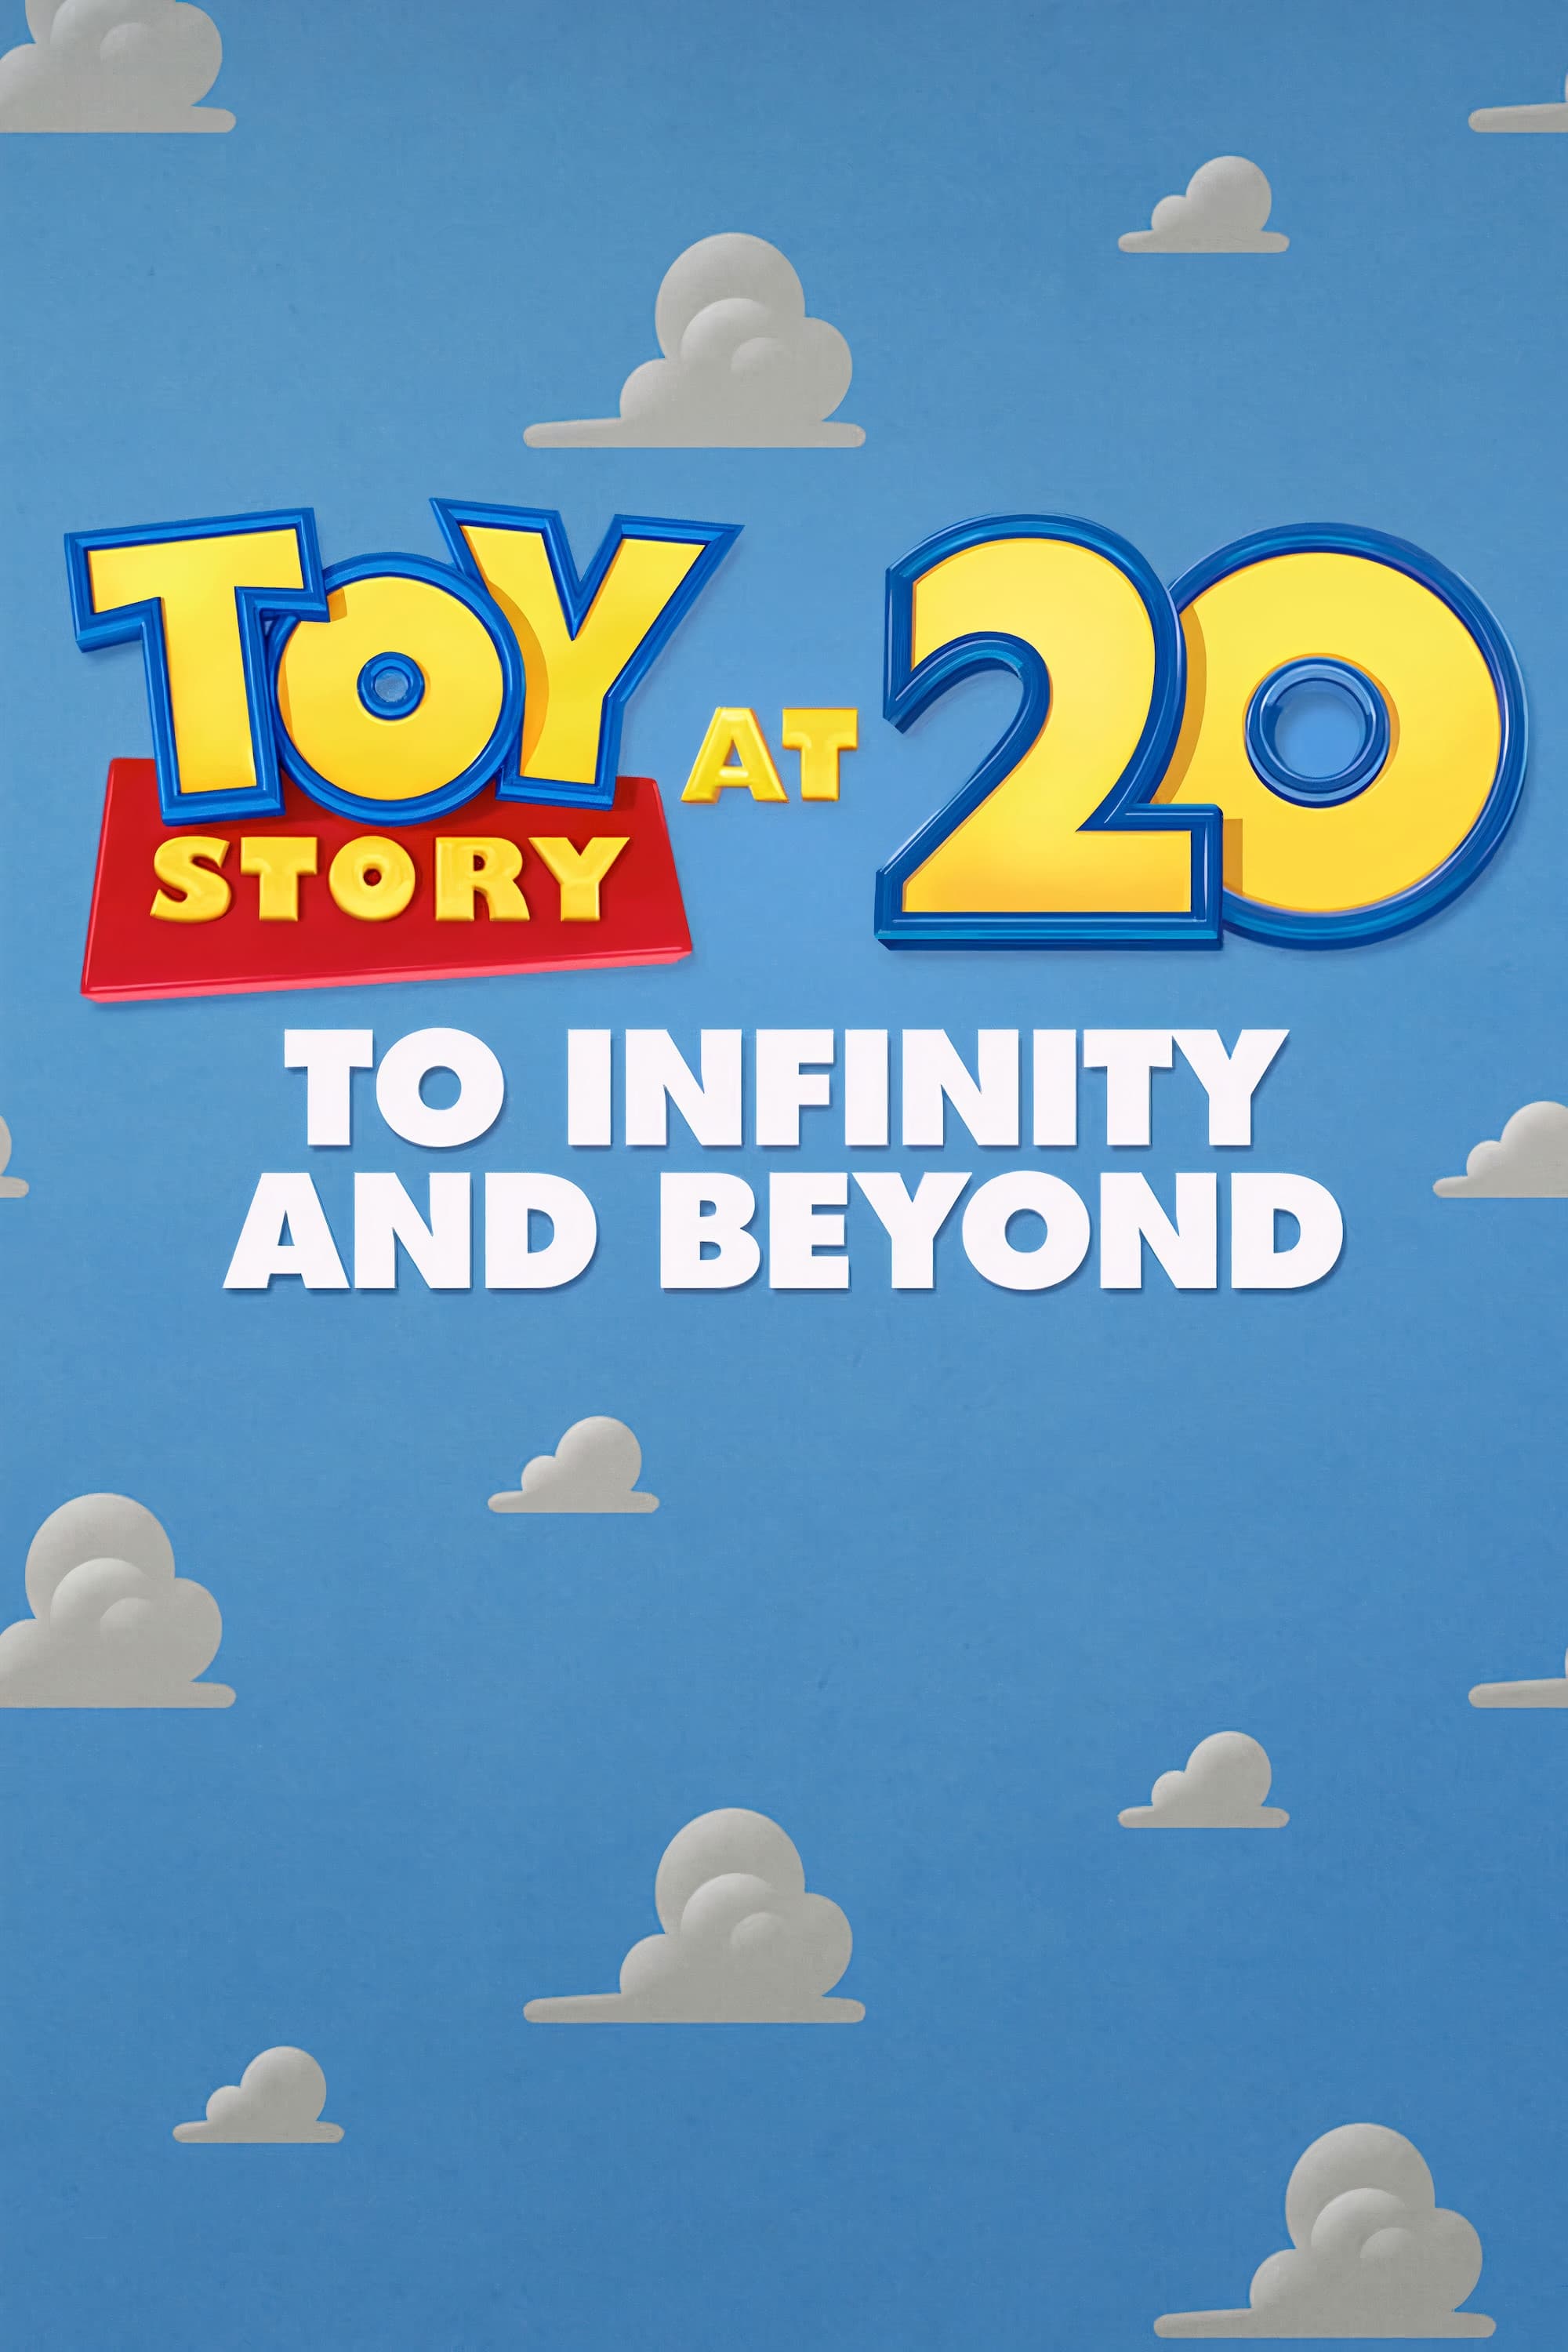 Toy Story at 20: To Infinity and Beyond (2015)